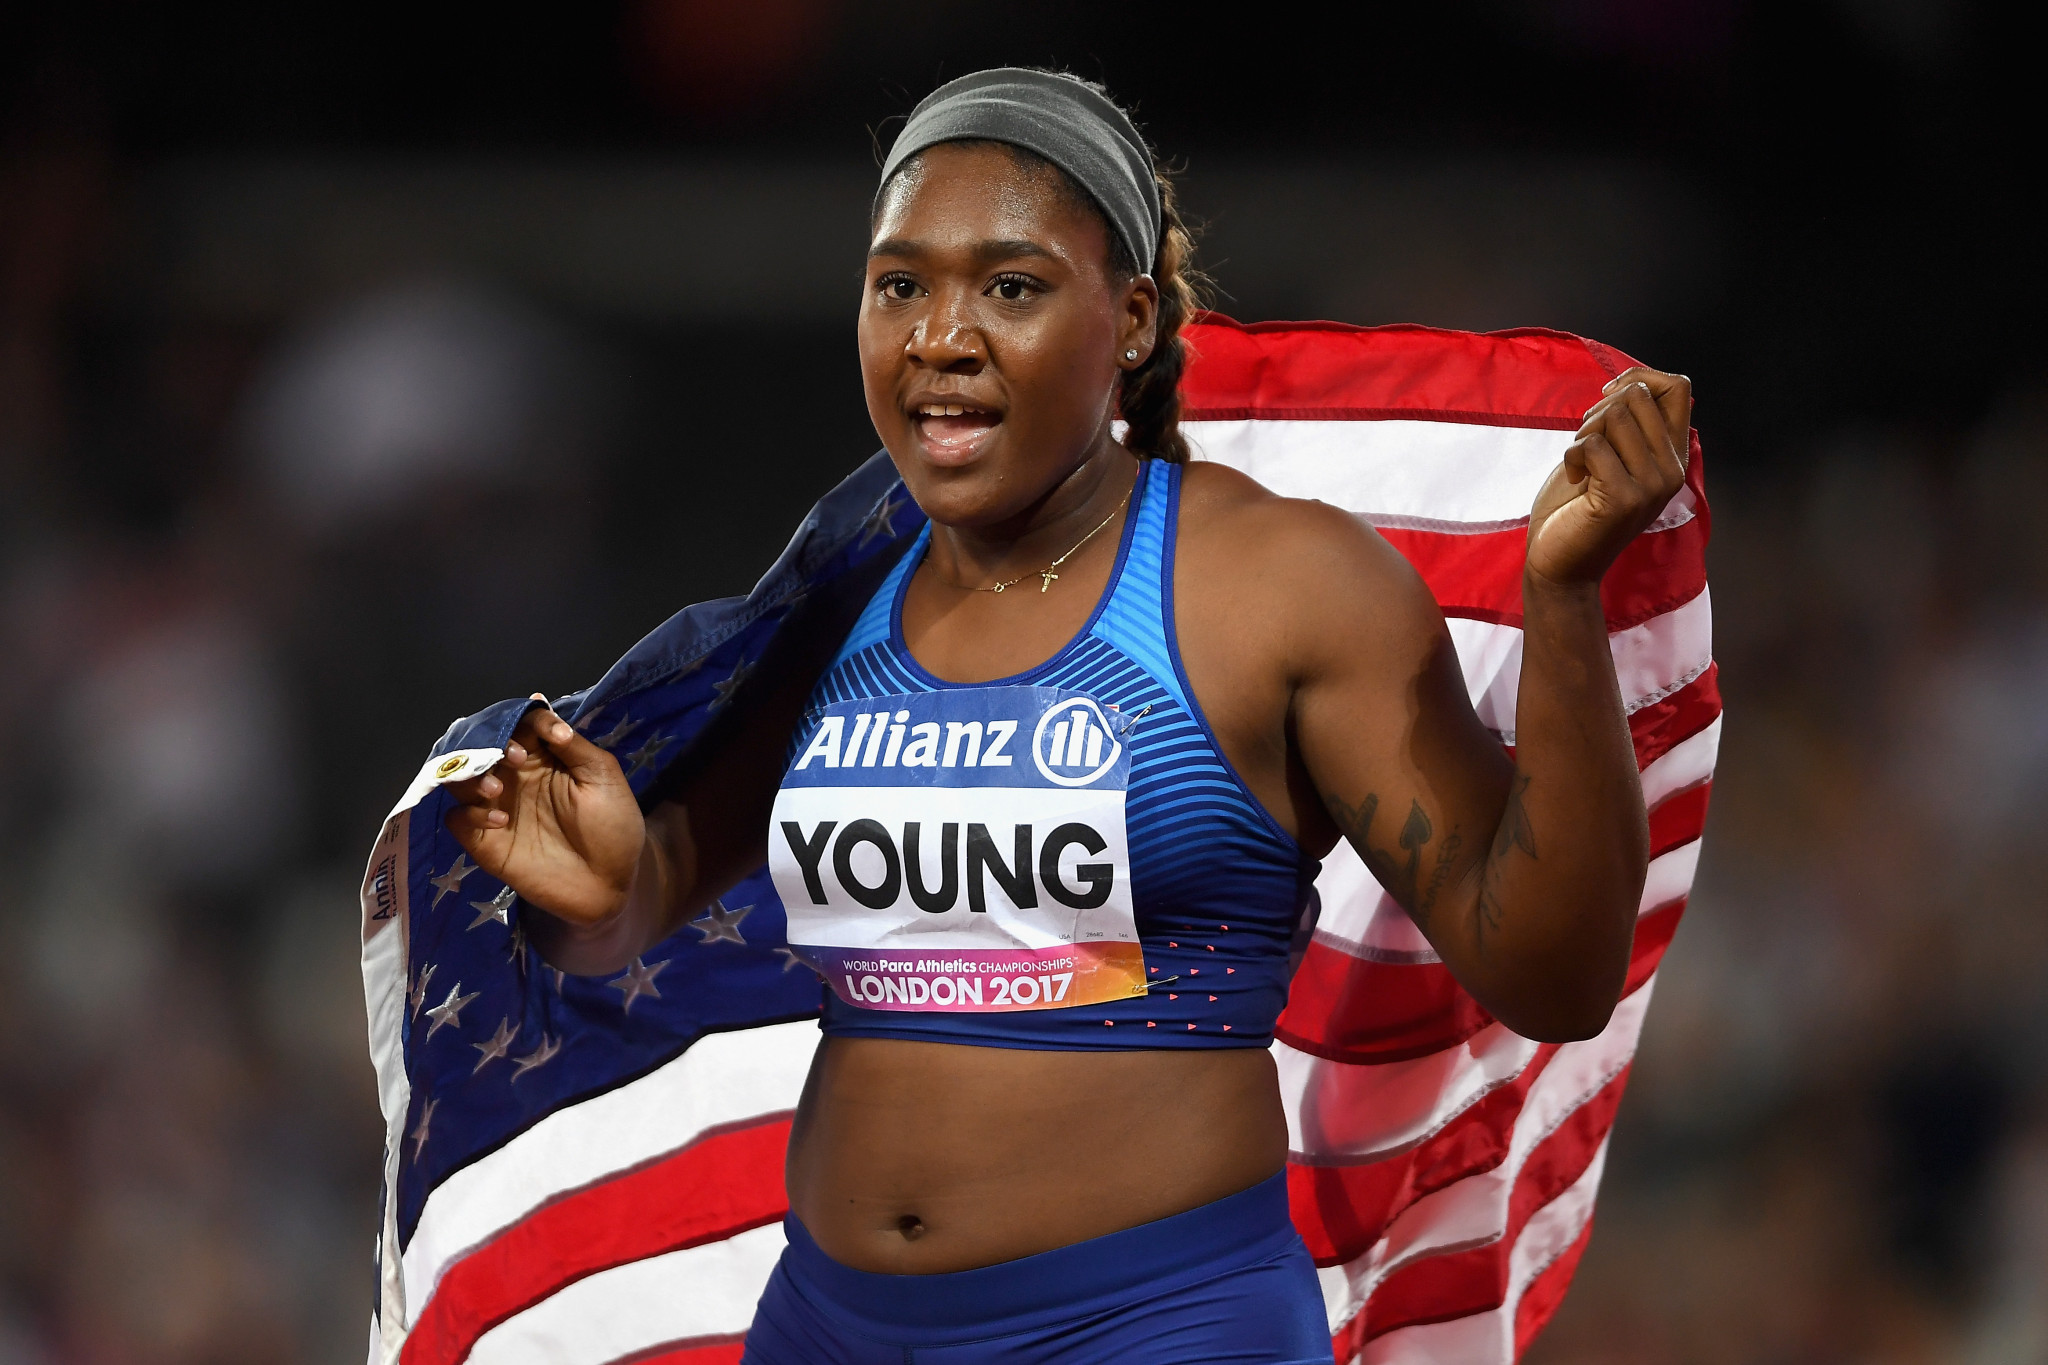 Deja Young is due to race for the United States in Grosseto ©Getty Images